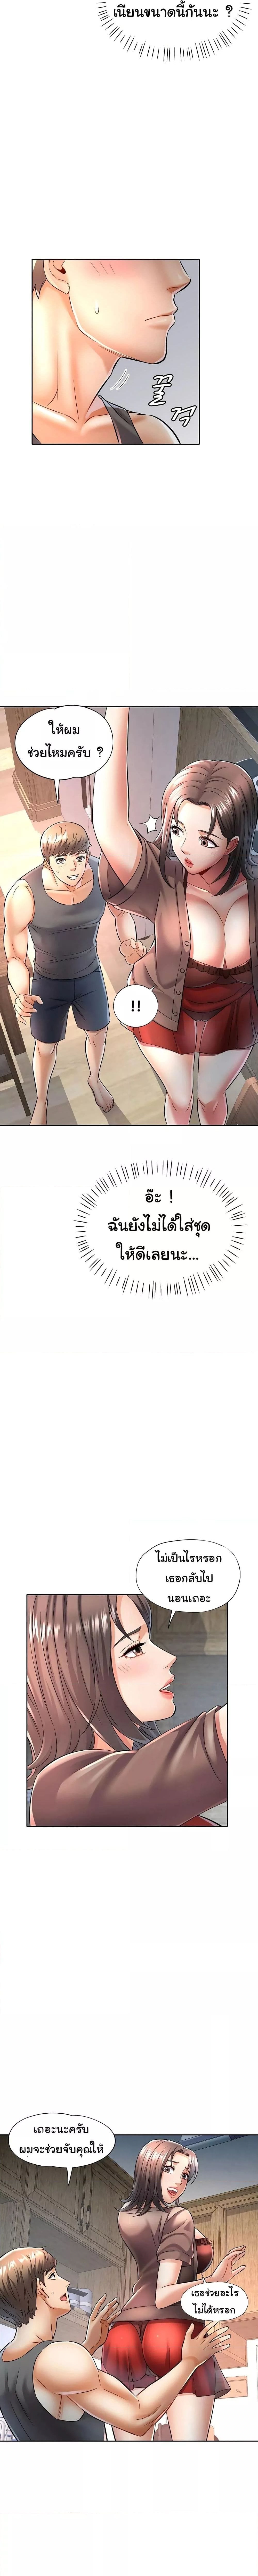 In Her Place ตอนที่ 6 ภาพ 5